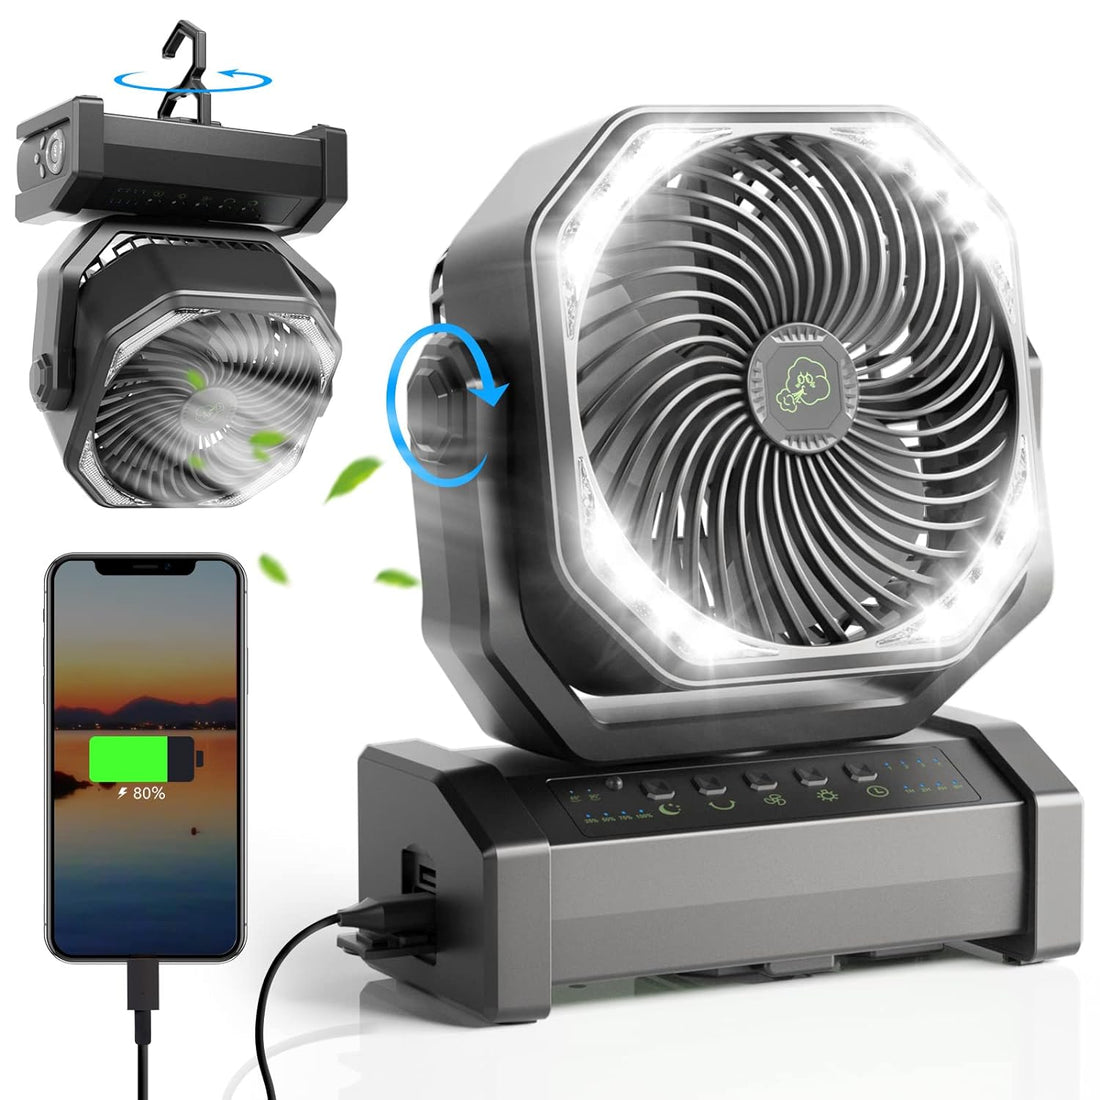 20000mAh Personal Fan with LED Lantern, Auto-Oscillating Desk Fan with Remote & Hook, Rechargeable Battery Operated Camping Fan with Timer, 4 Speeds USB Fan for Camp Travel Jobsite…